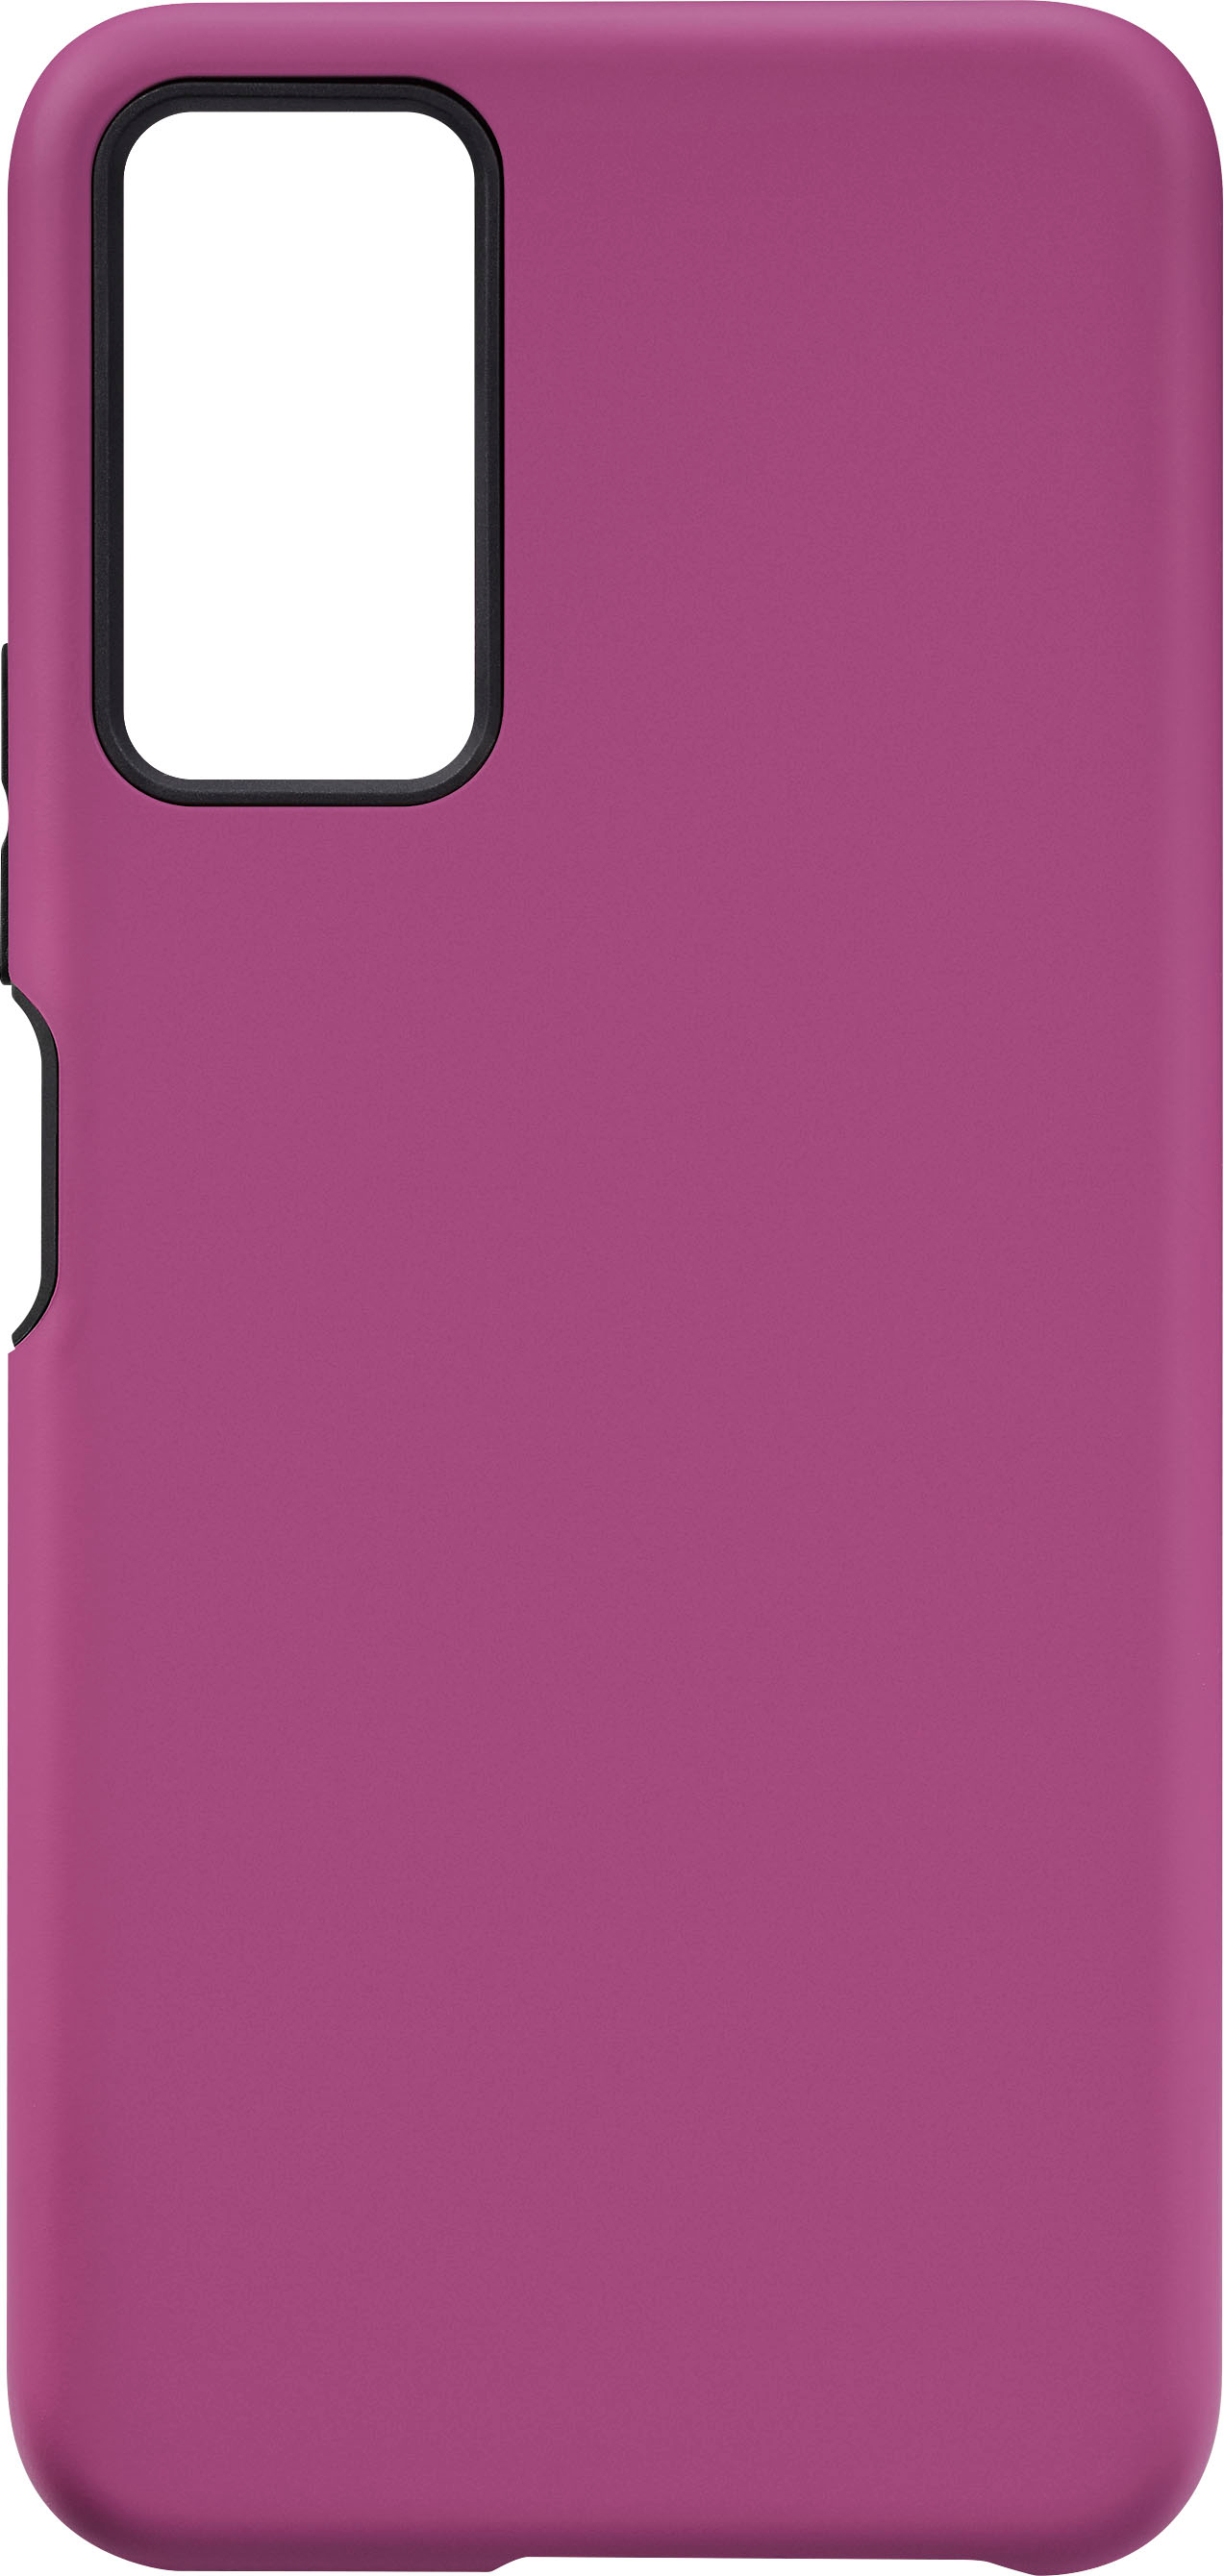 Lively® - Dual-Layer Hard Shell Case for Jitterbug Smart4 - Pink